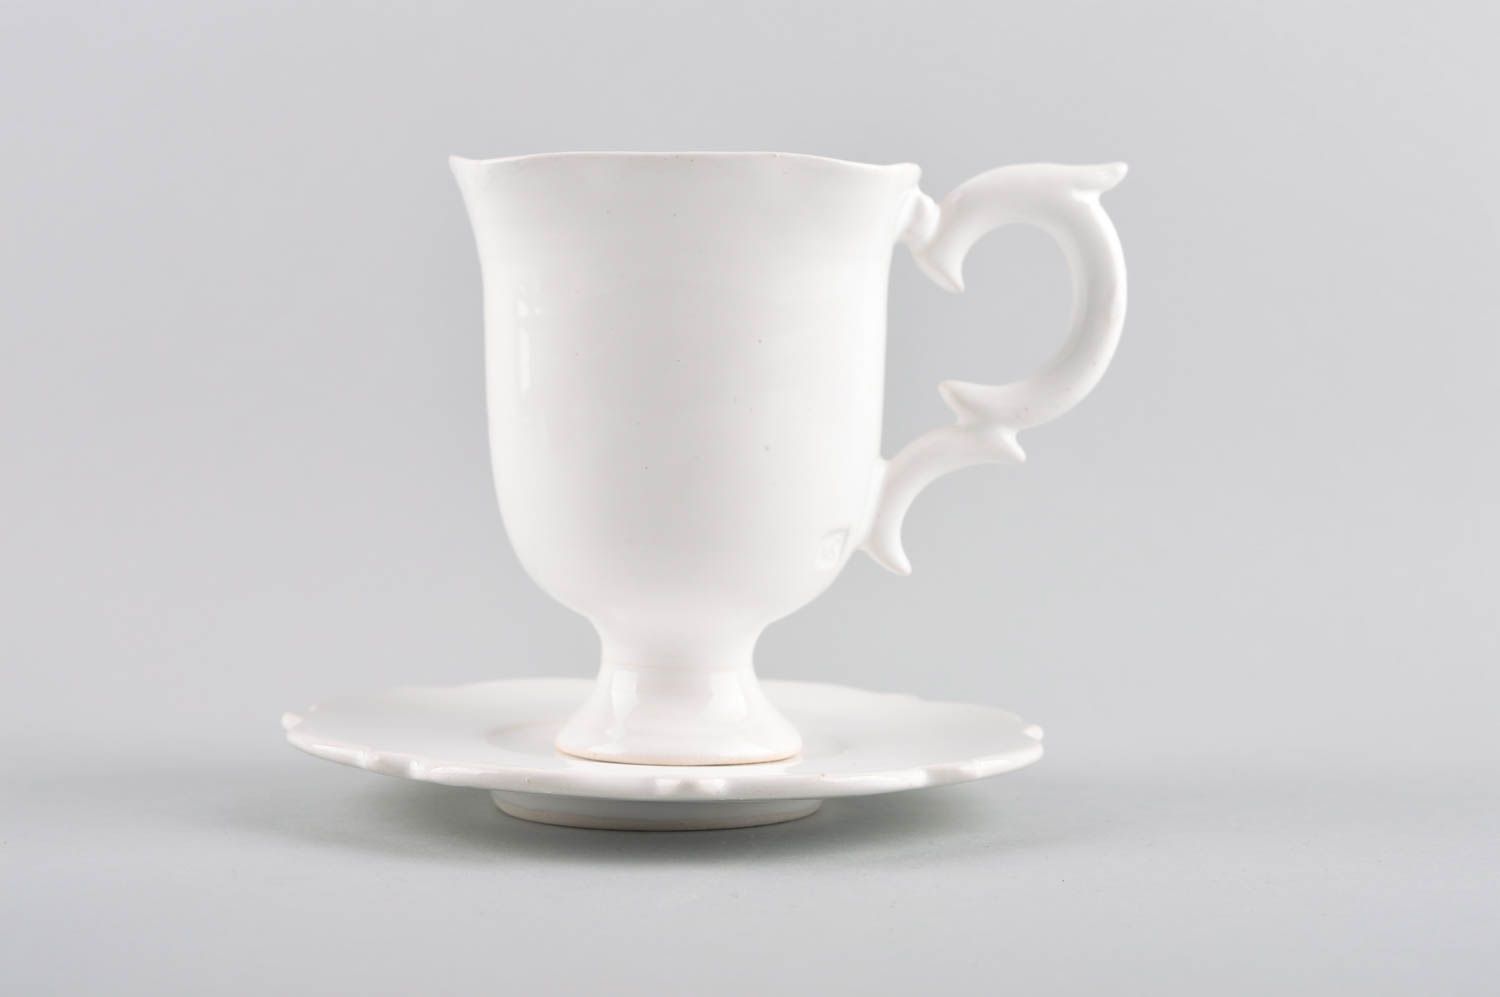 Super elegant white porcelain teacup with handle and saucer photo 5